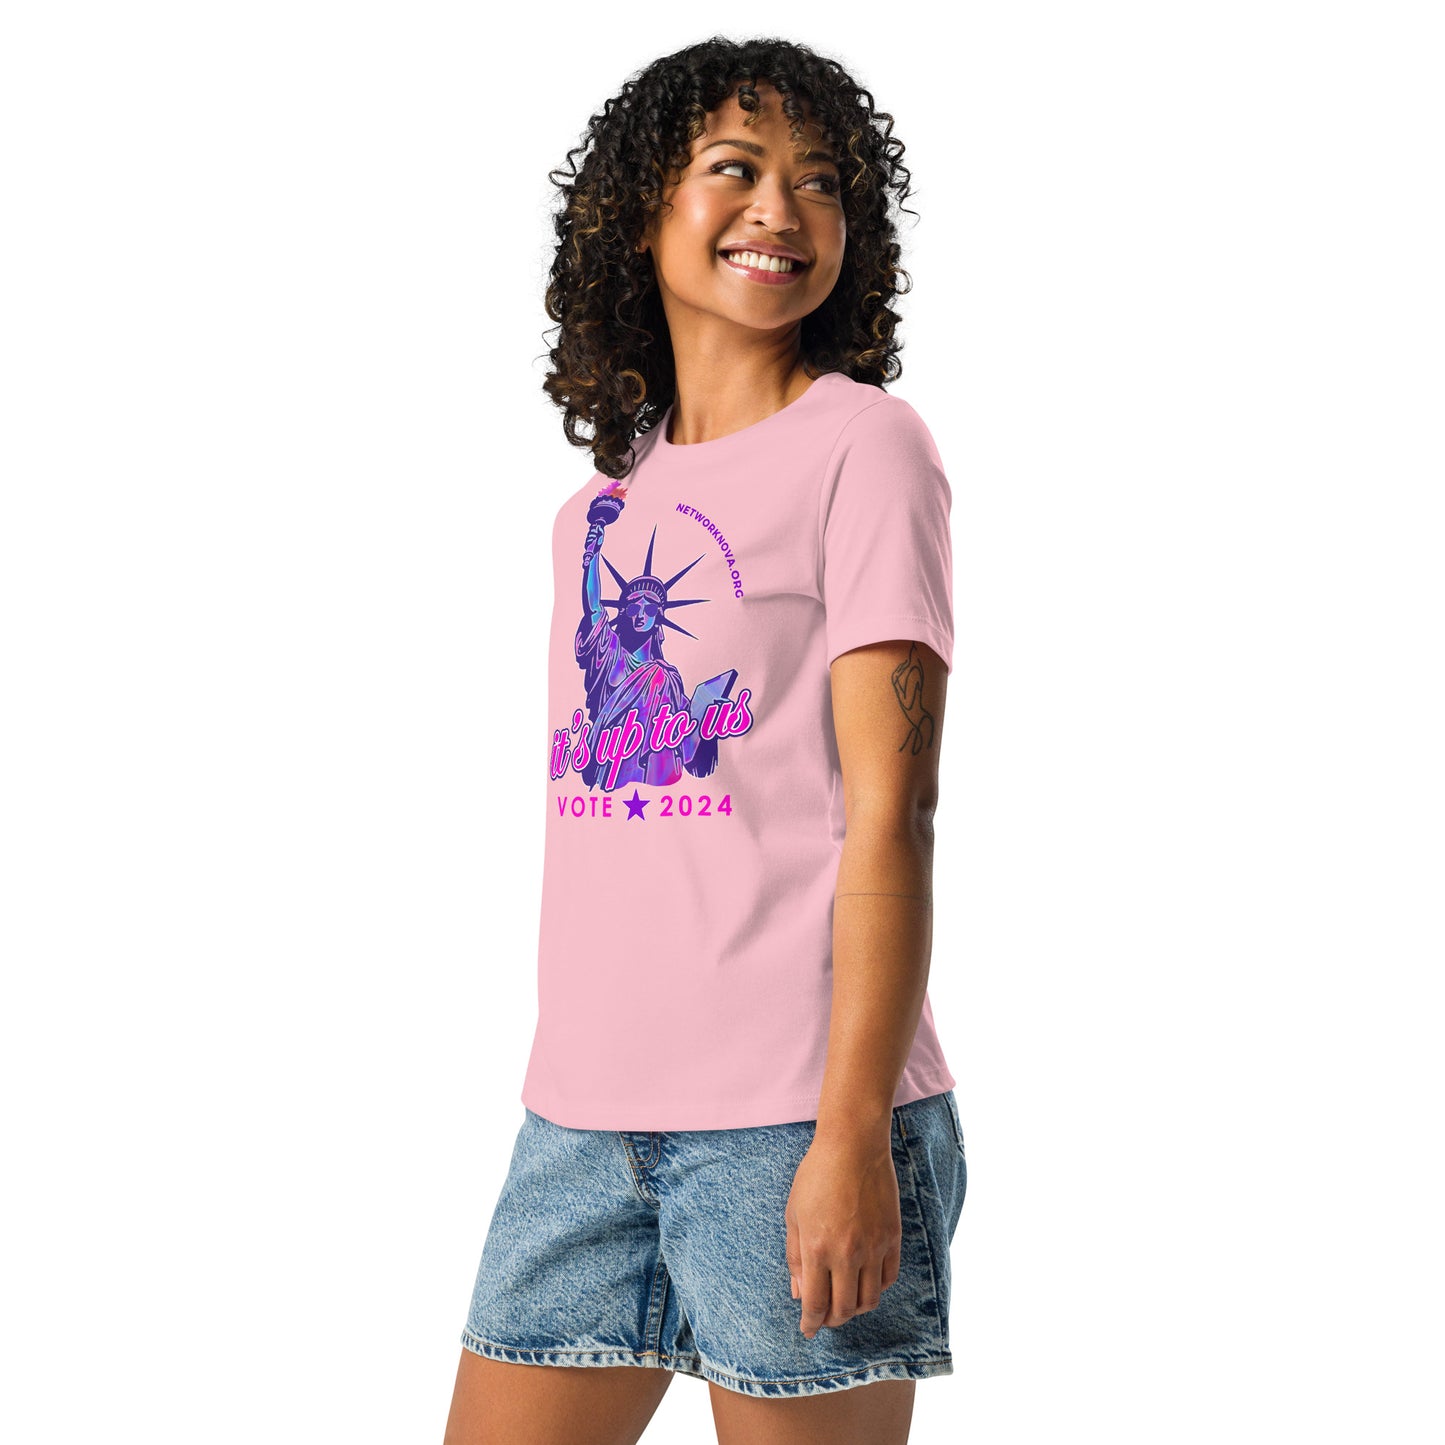 It's Up to Us Women's T-Shirt